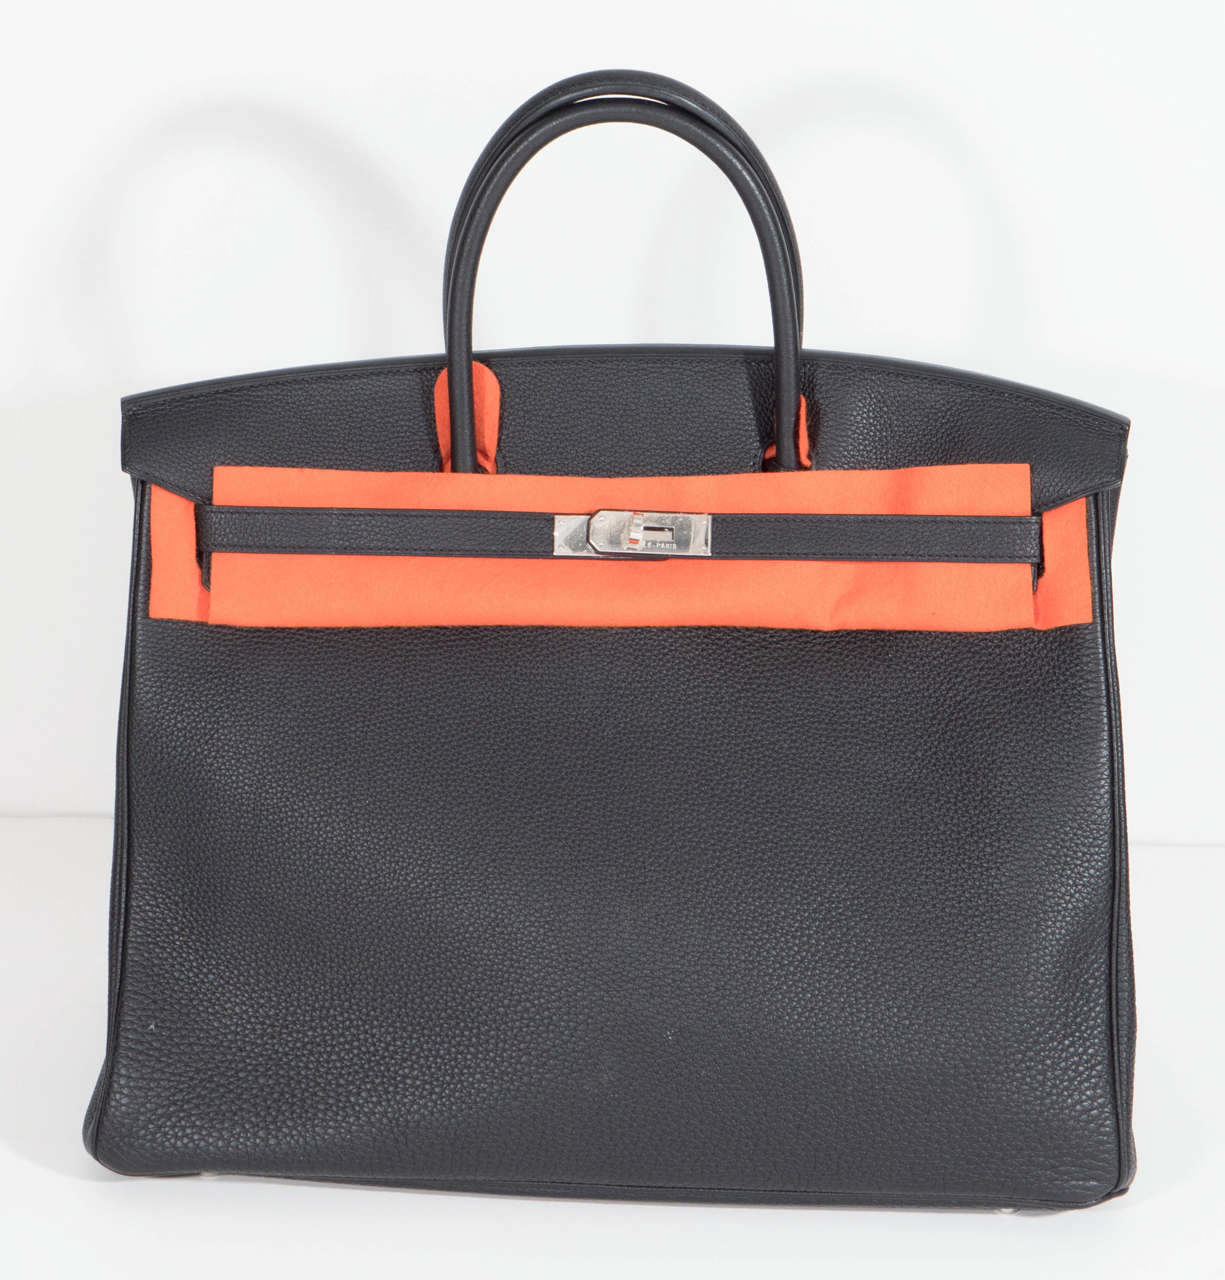 The ultimate status symbol by Hermes, the 40 Birkin bag in black Togo leather with Palladium Hardware, 2008. Date stamped L in a square. Never used. Has original dust bag, rain bag, keys and lock with own dust bag and Hermes care guide. No need to